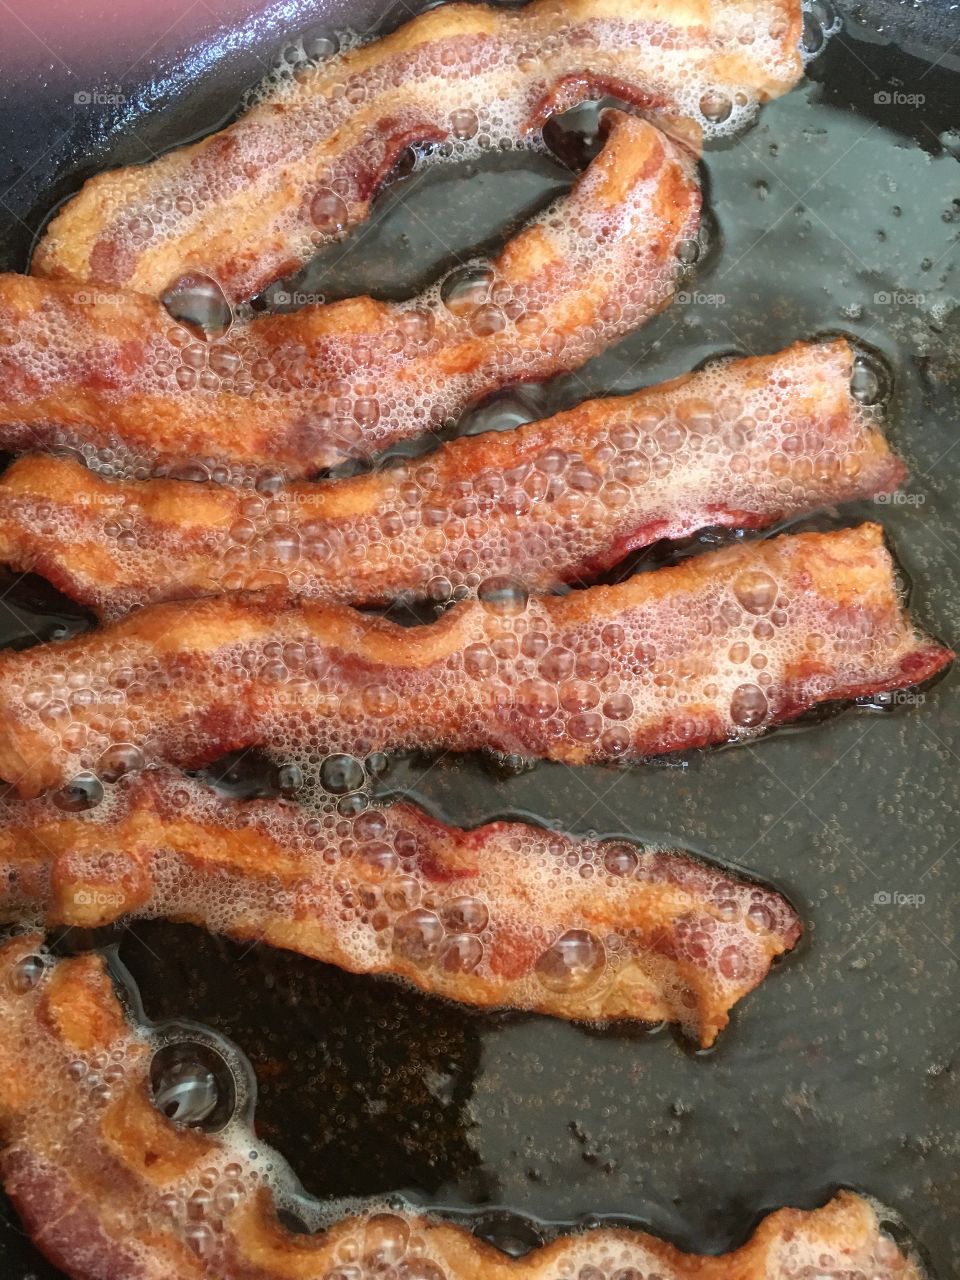 Frying up bacon